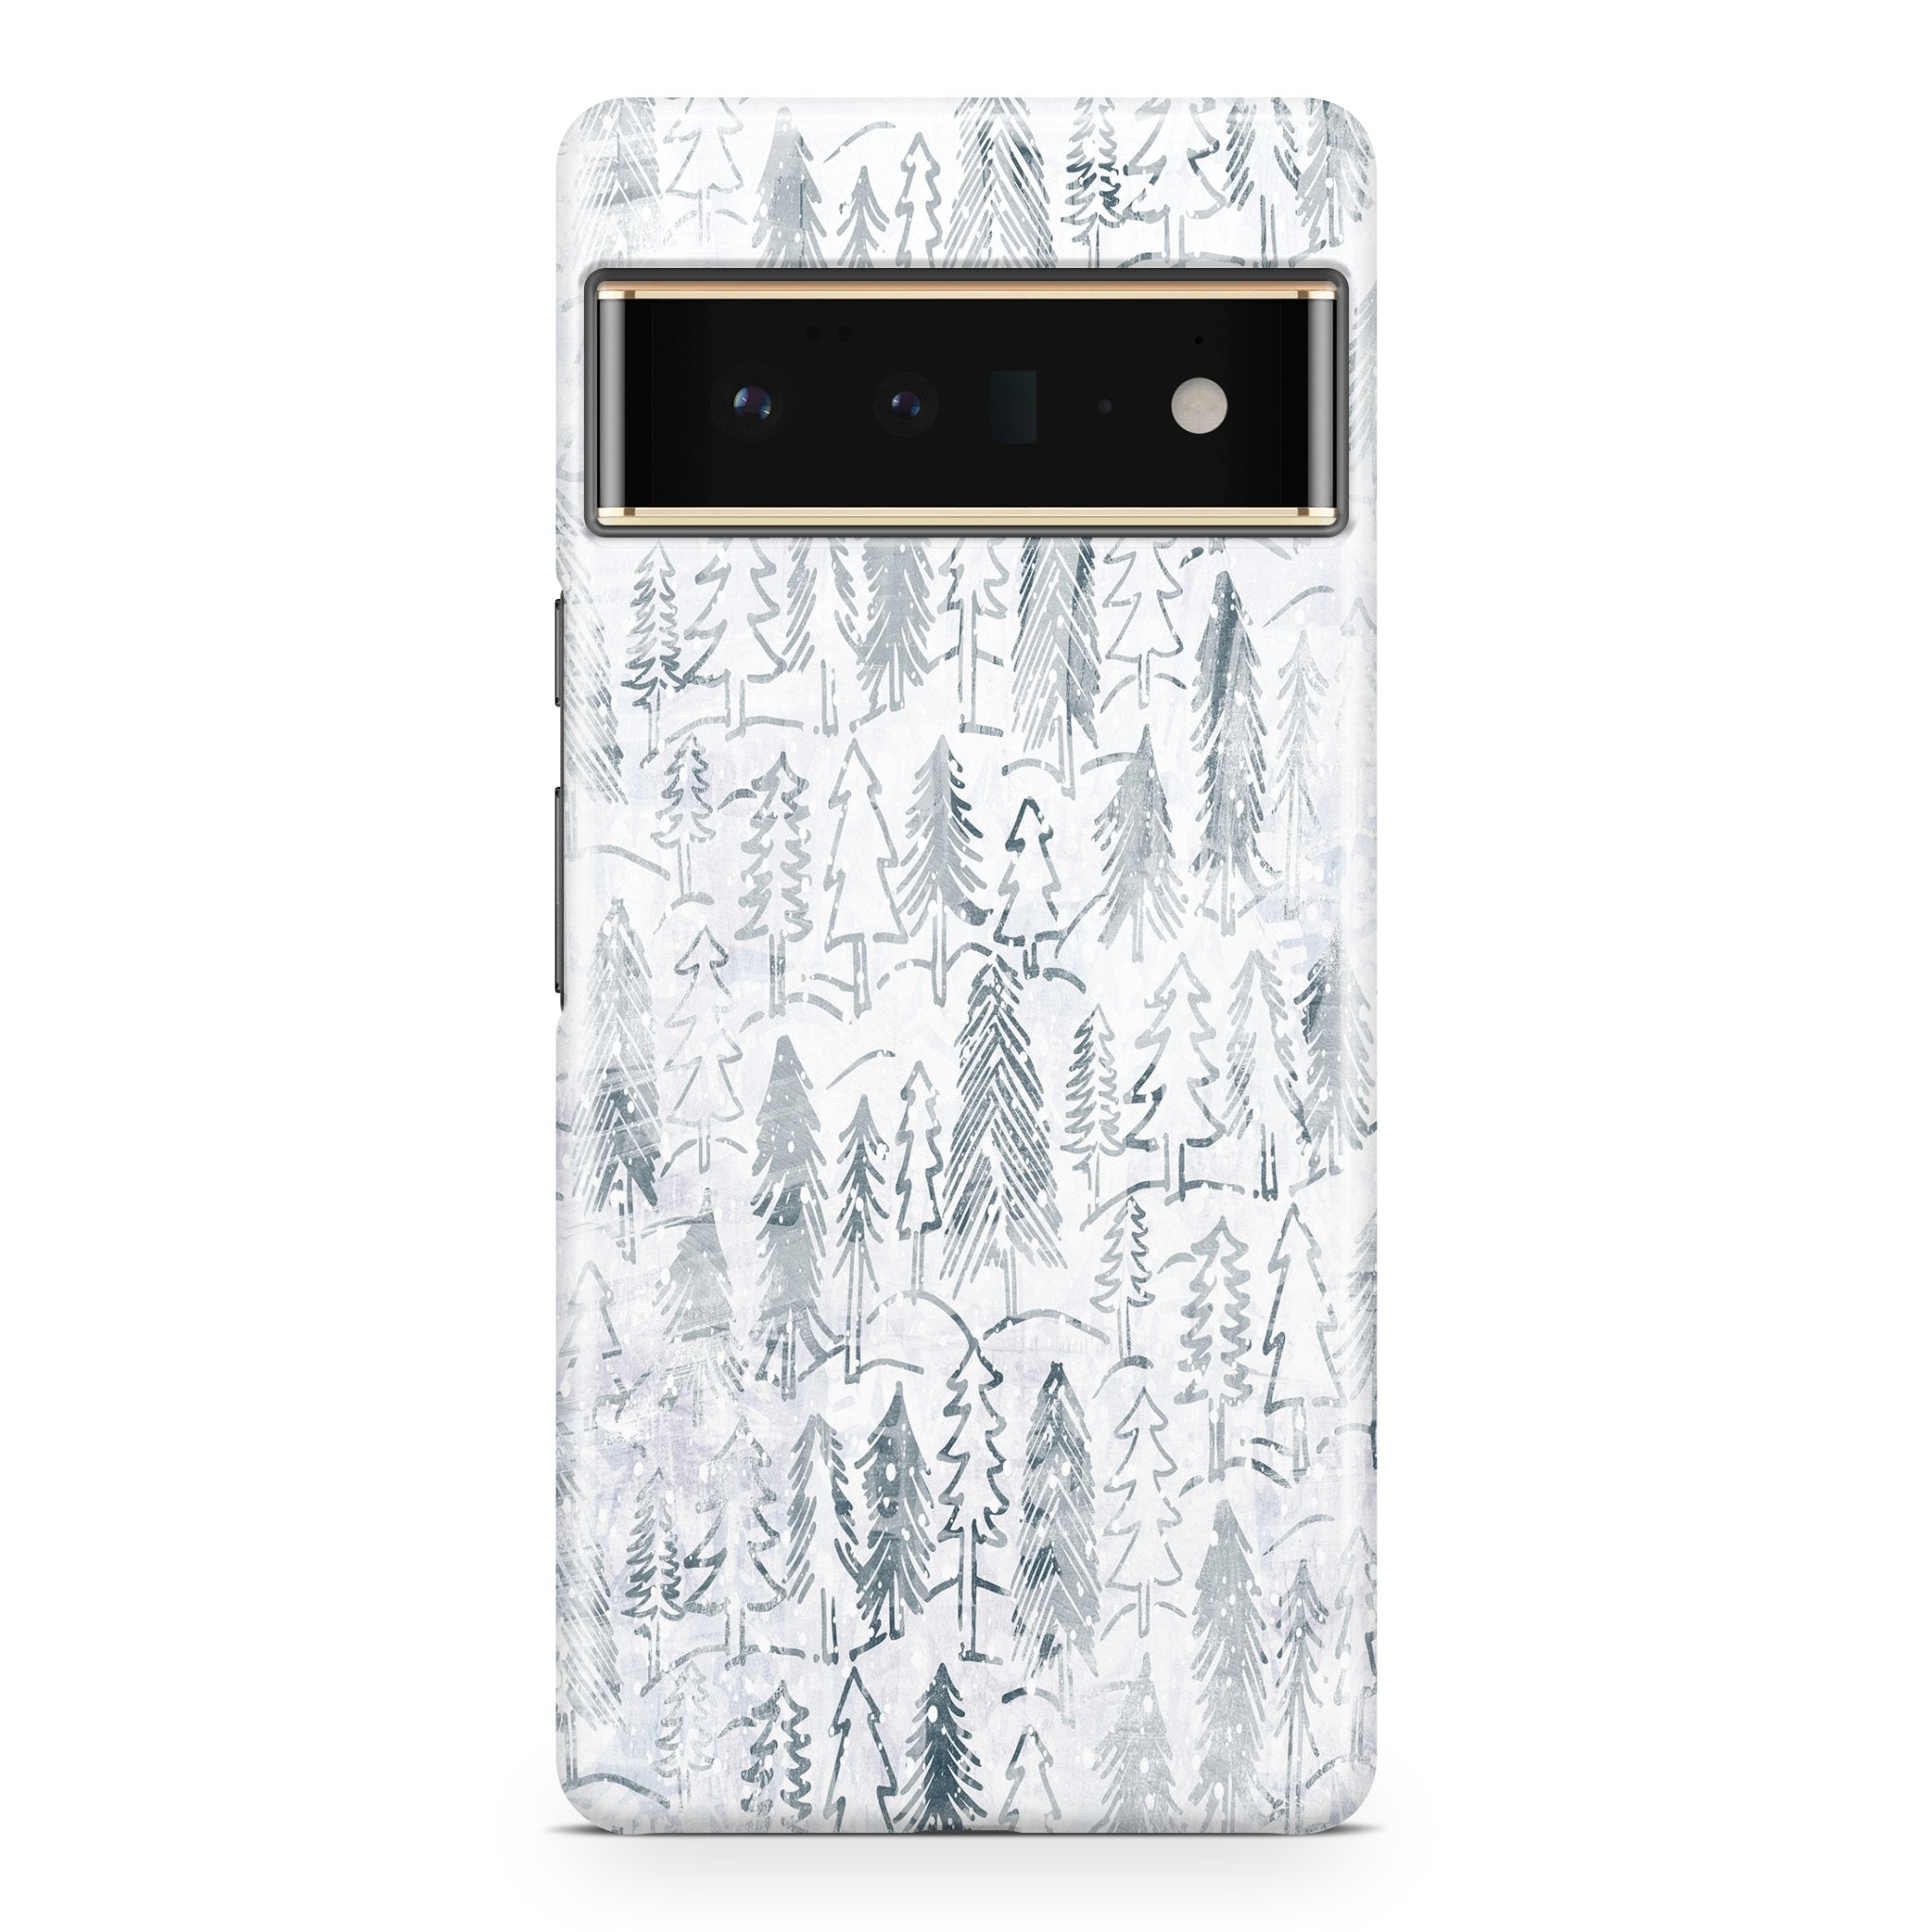 Winter Forest I - Google phone case designs by CaseSwagger